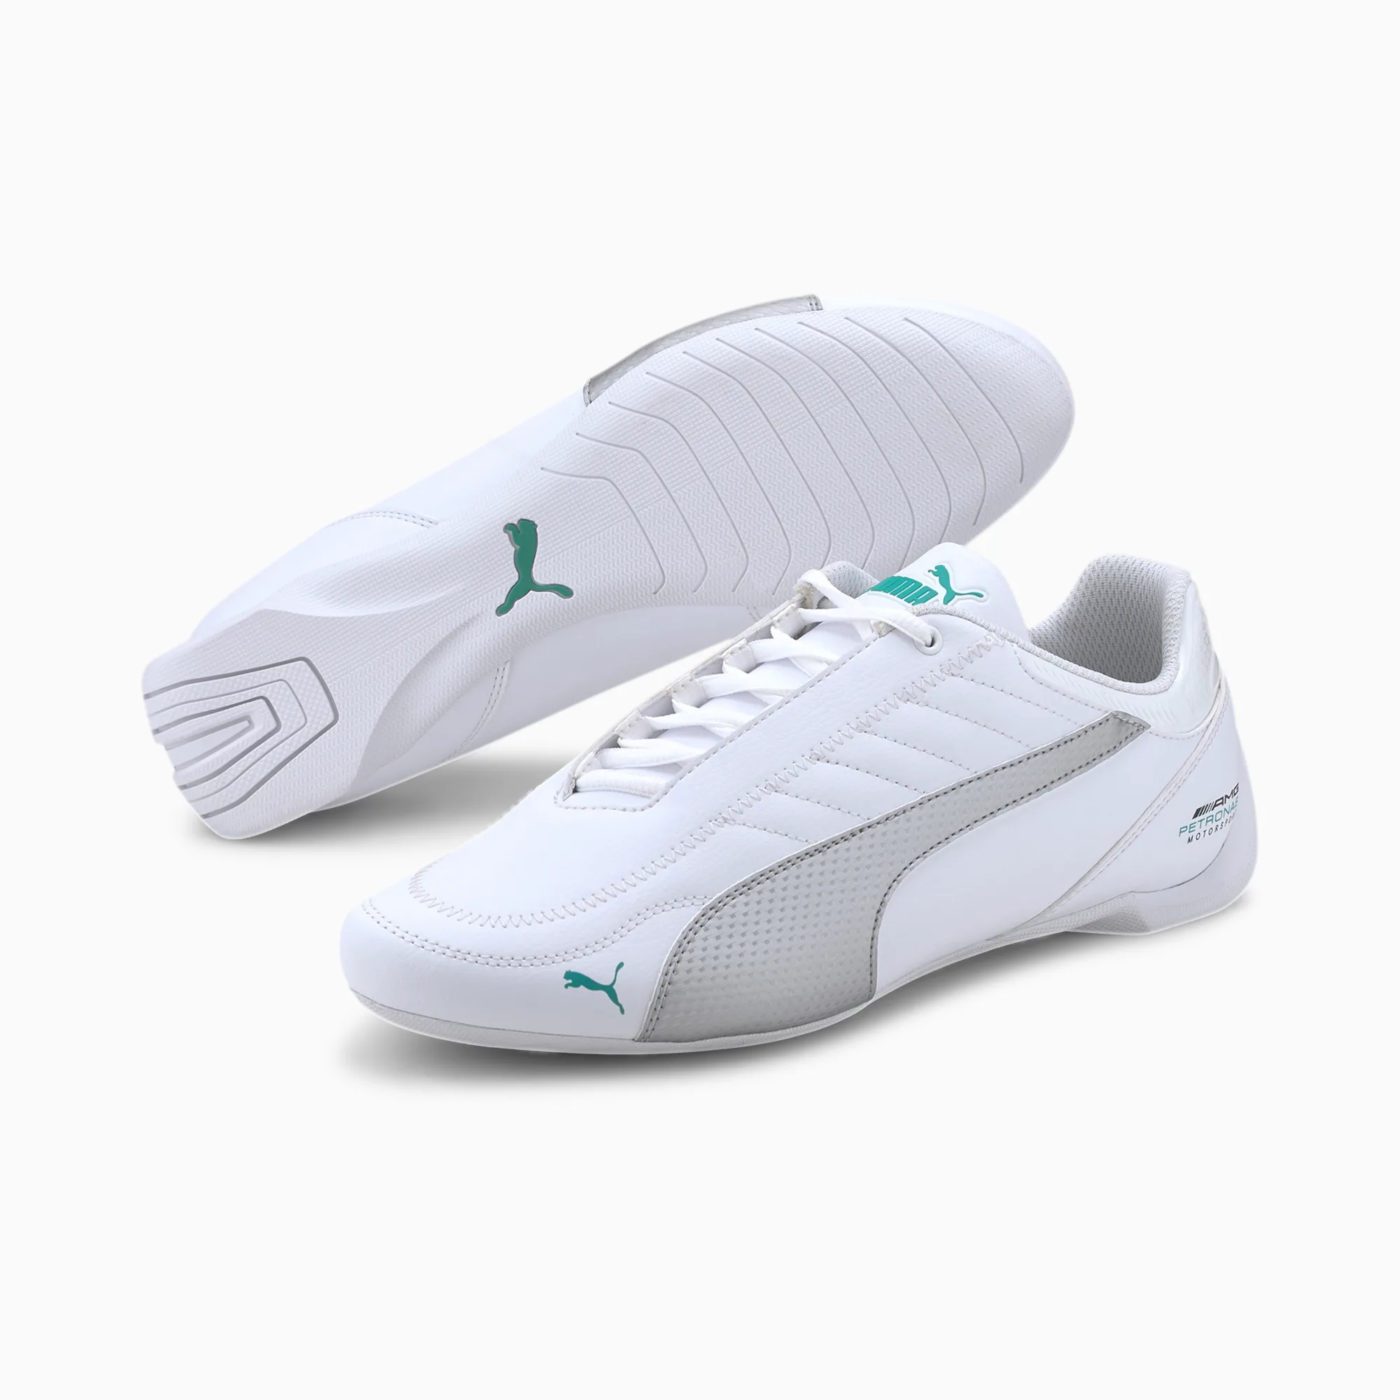 marking architect lonely The New Puma x Mercedes-AMG Petronas Future Kart Kat Sneakers Now Available